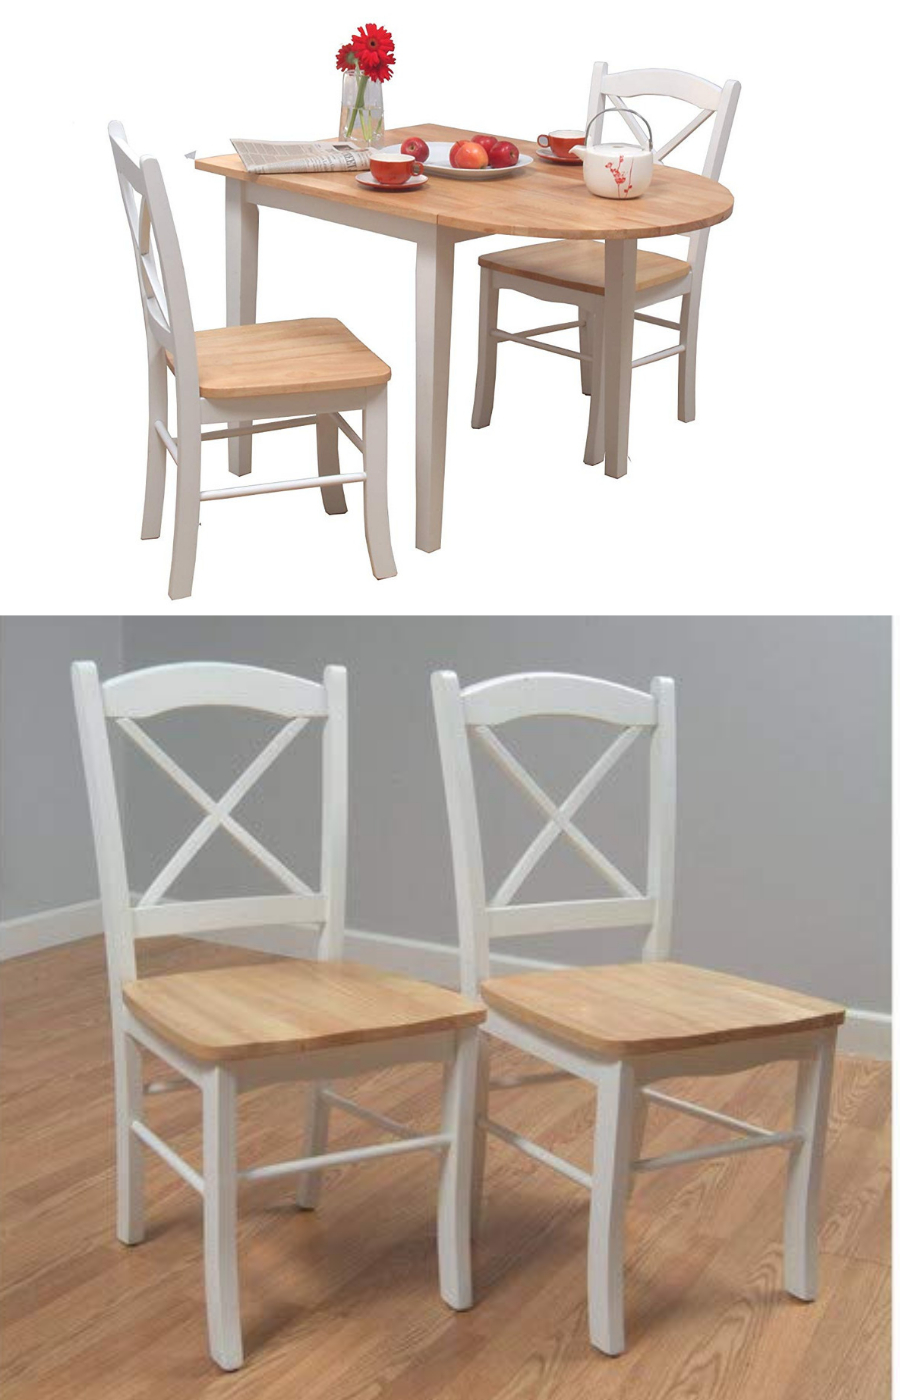 3 Piece Tiffany Country Cottage Dining Set With 2 Chairs dedans Countrycottage Dining Room Furniture Reviews